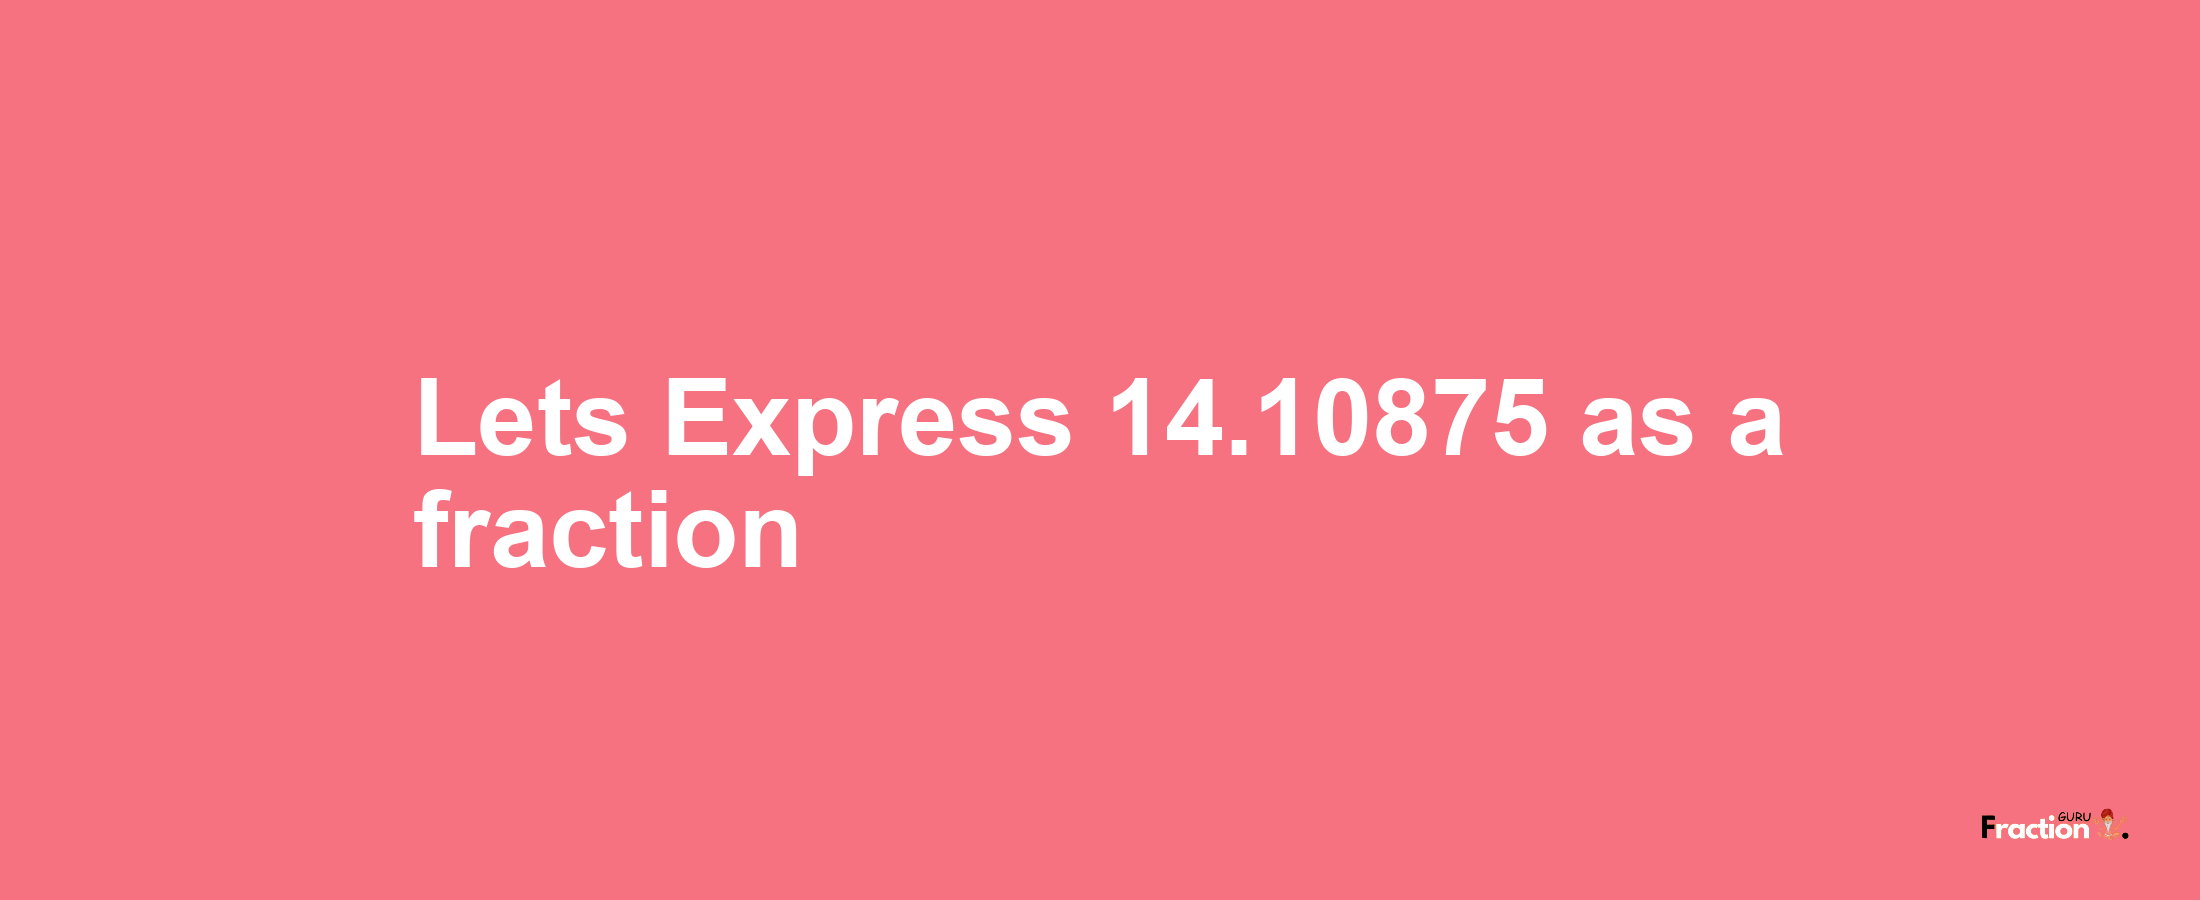 Lets Express 14.10875 as afraction